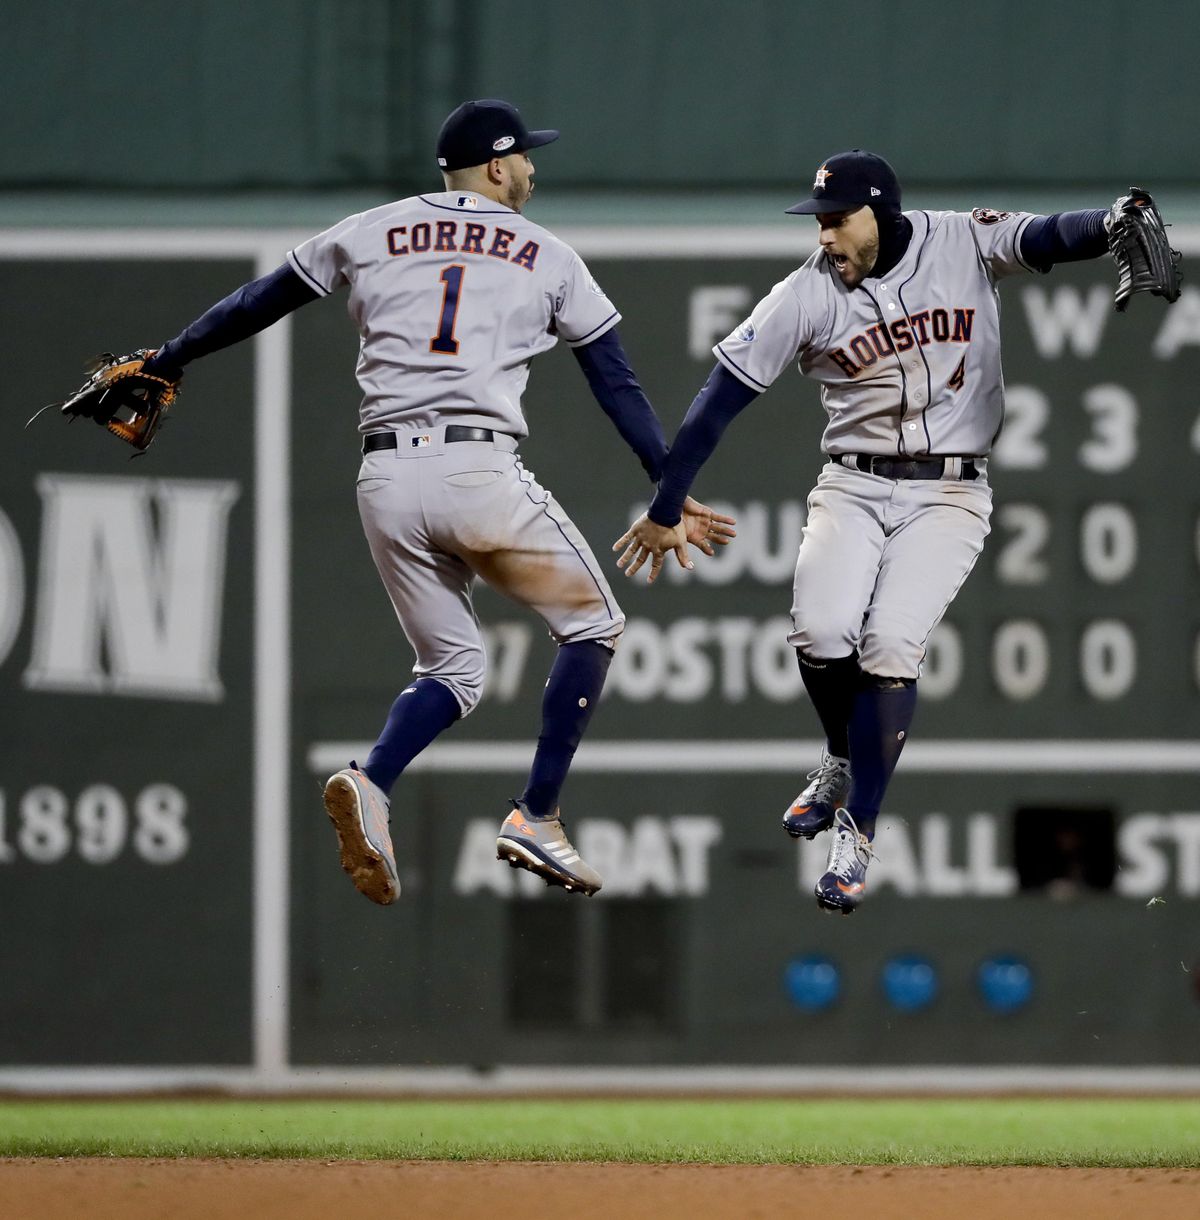 Houston Astros center fielder George Springer, right, and shortstop Carlos Correa celebrate their win against the Boston Red Sox in Game 1 of a baseball American League Championship Series on Saturday, Oct. 13, 2018, in Boston. The Astros won 7-2. (David J. Phillip / Associated Press)